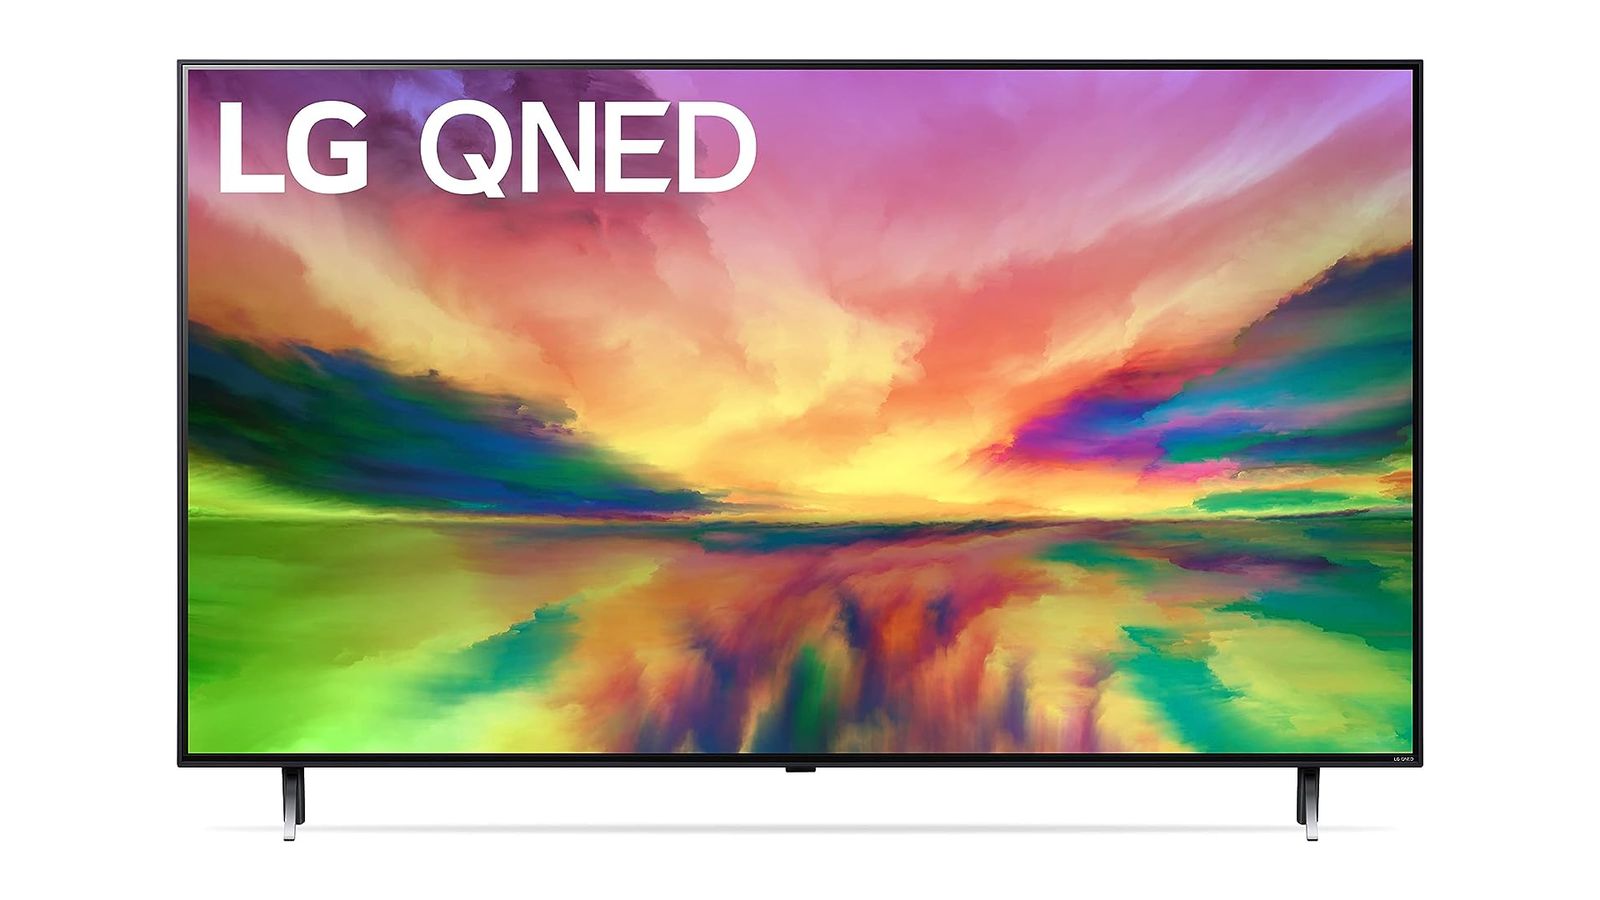 LG QNED80 product image of a near-frameless black TV featuring a painted sunset scene over a lake on the display.